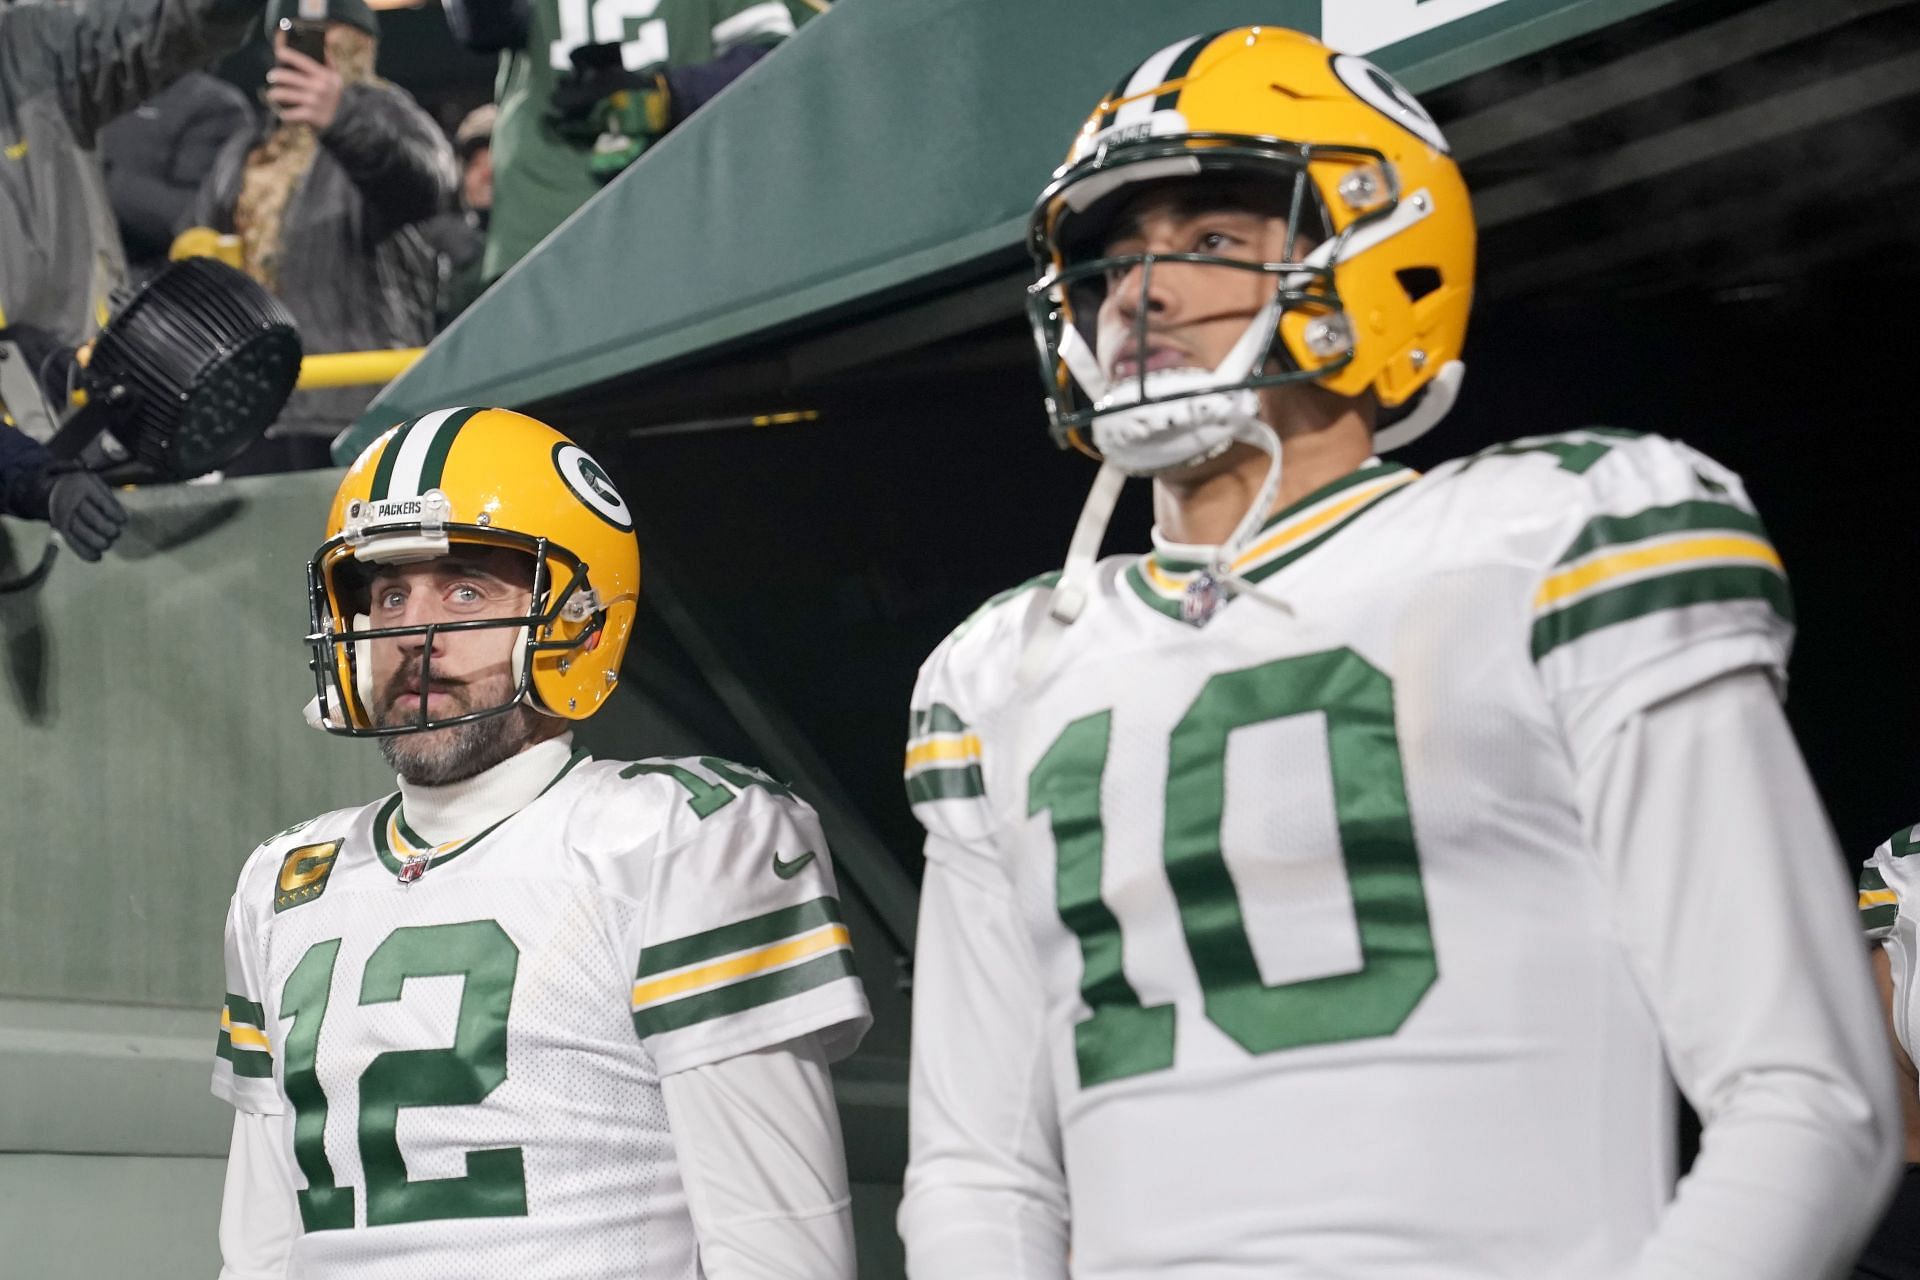 The Packers are facing uncertainty in a potential post-Aaron Rodgers era